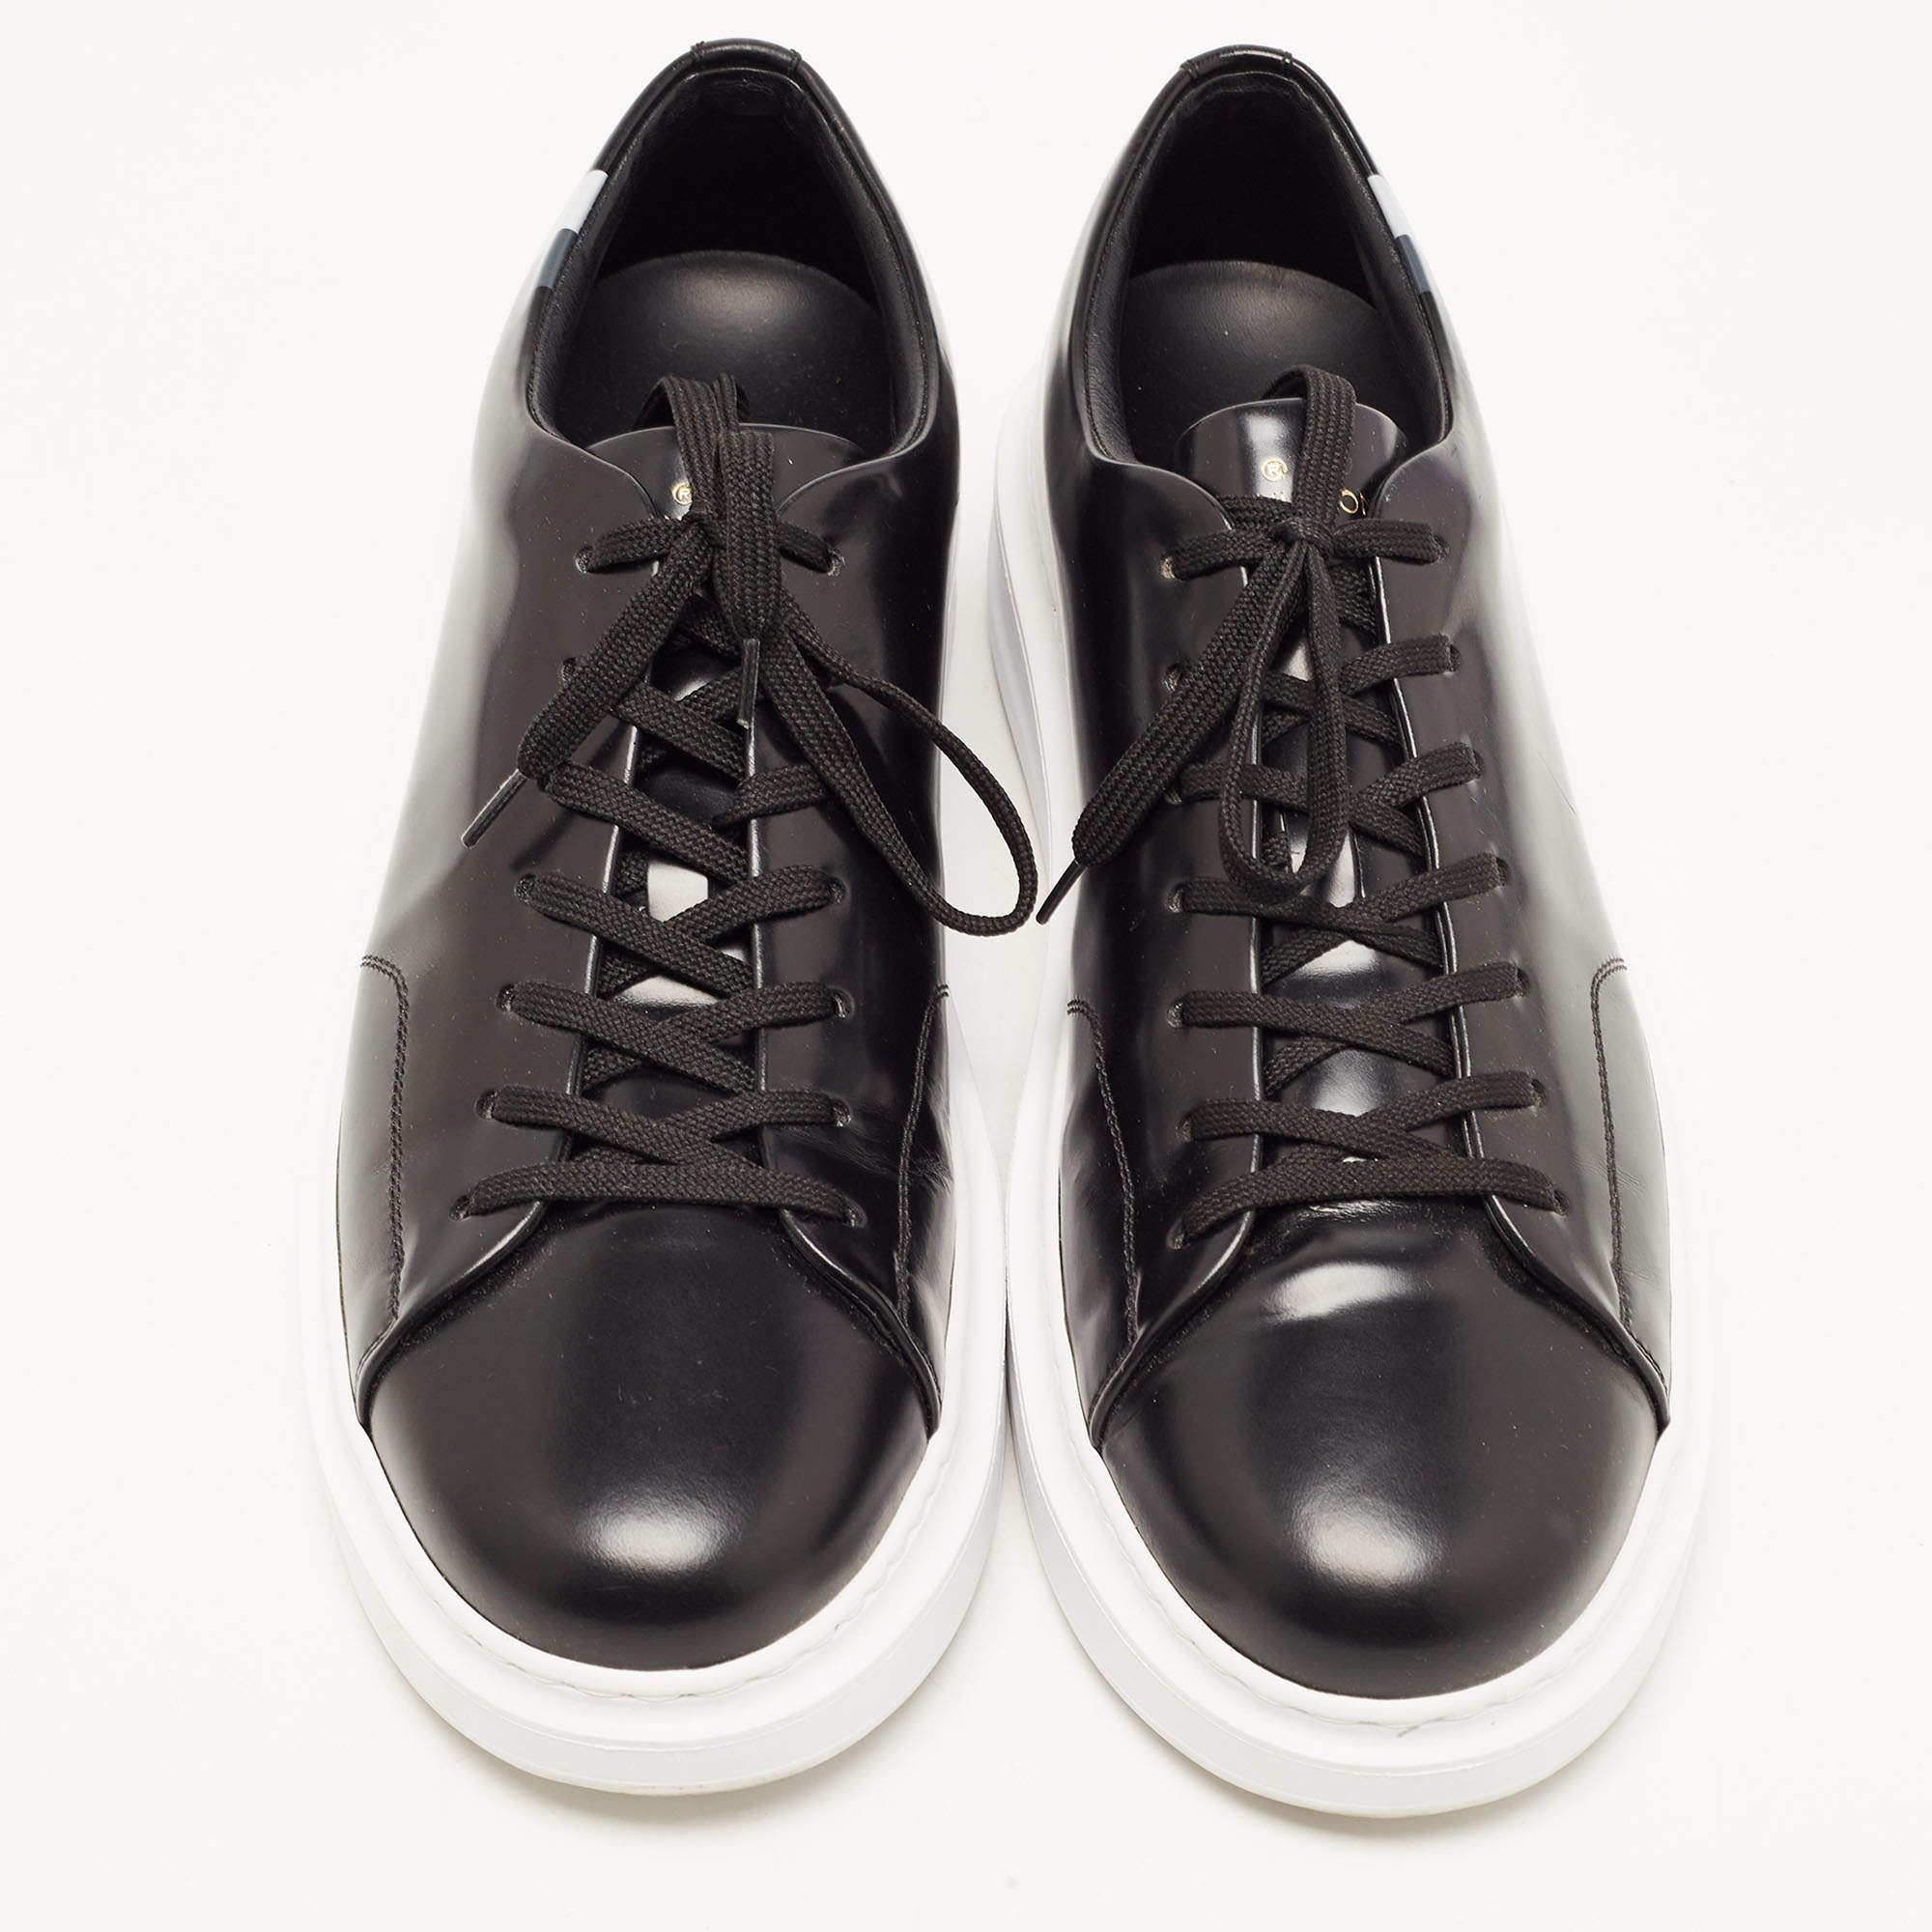 Beverly hills leather low trainers Louis Vuitton Black size 43 EU in  Leather - 32104523